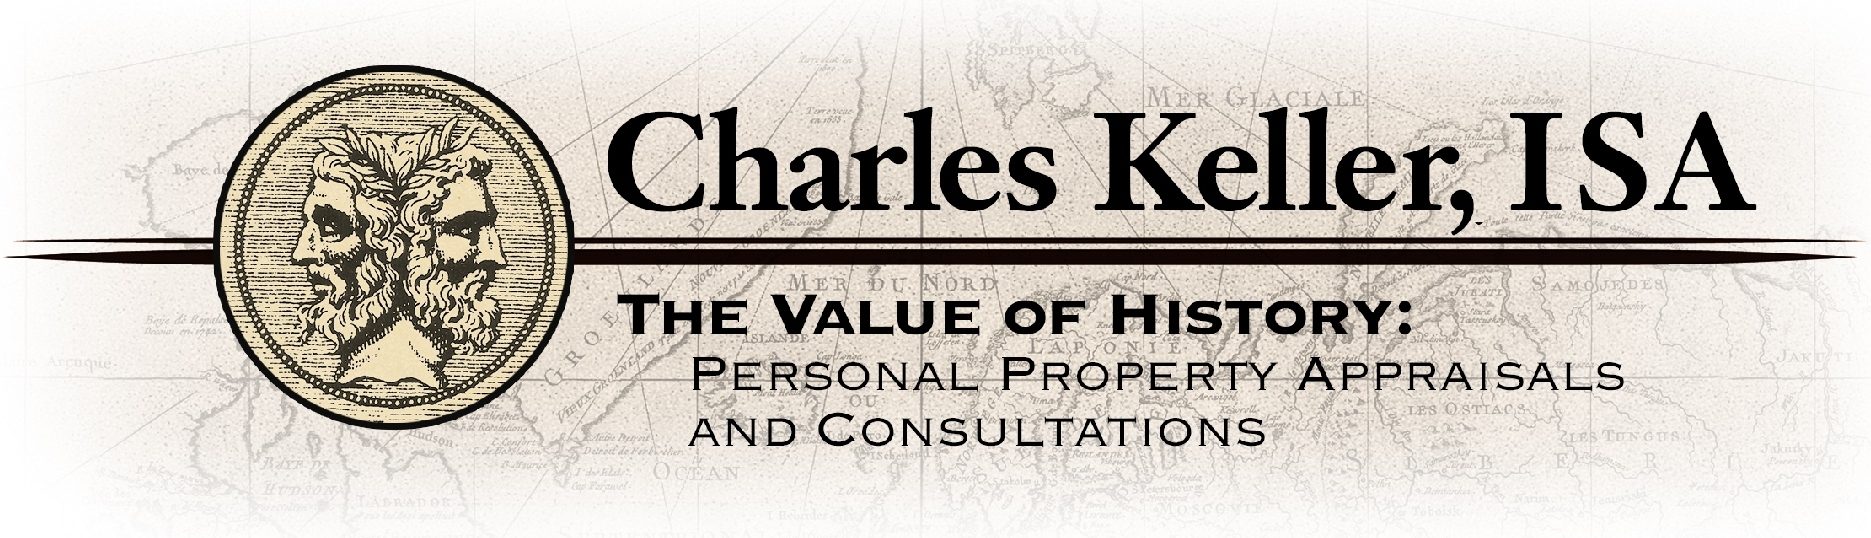 The Value of History: Appraisals & Consultations